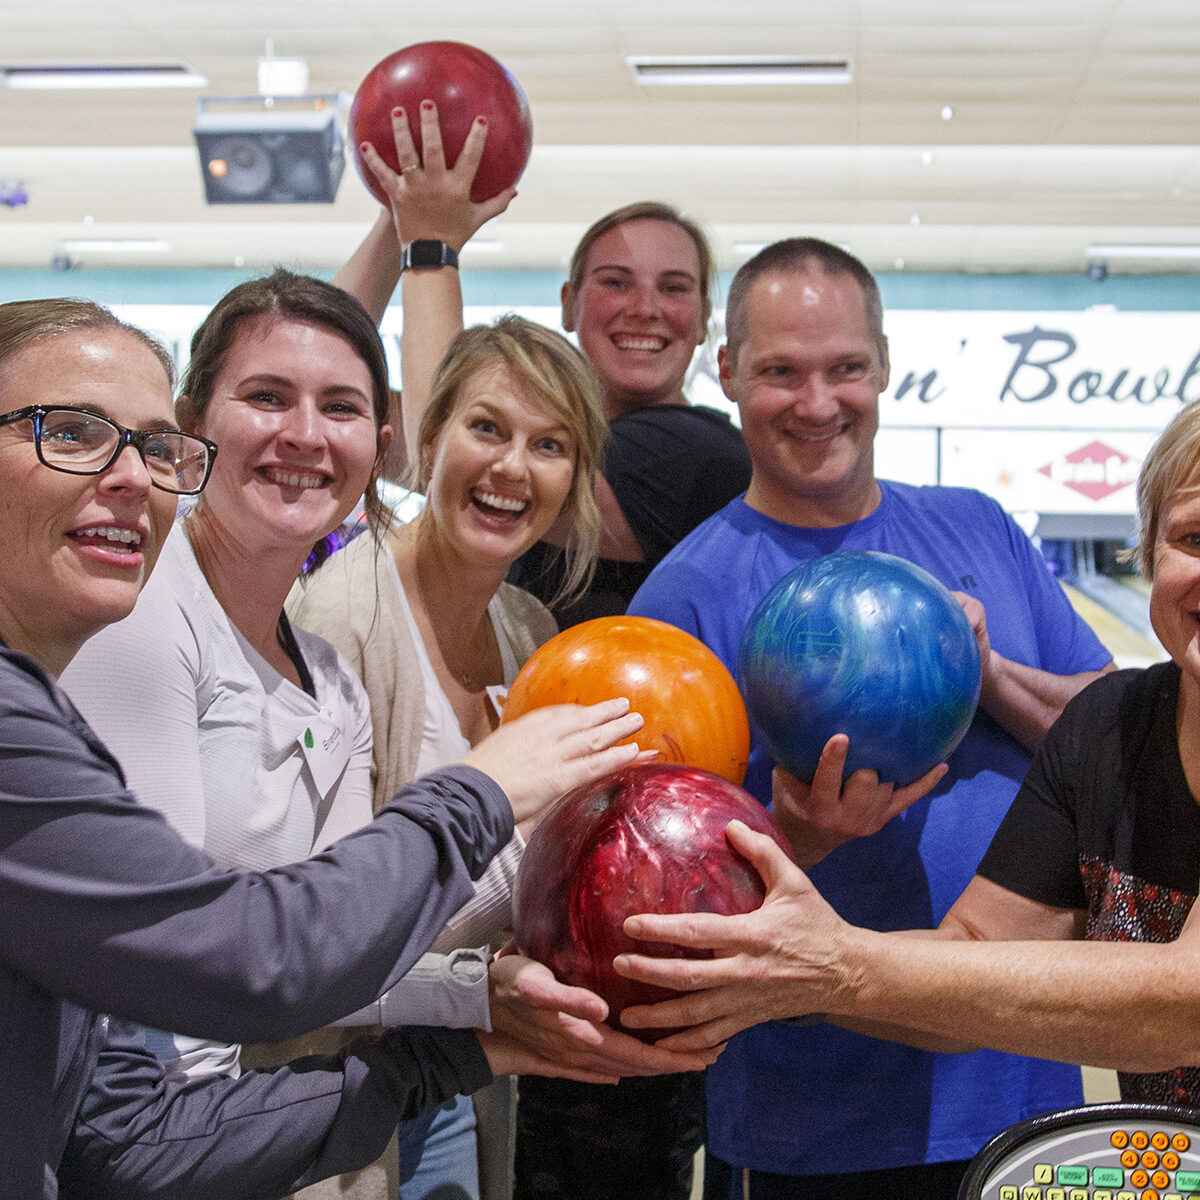 Having a BALL at our staff bowling day.